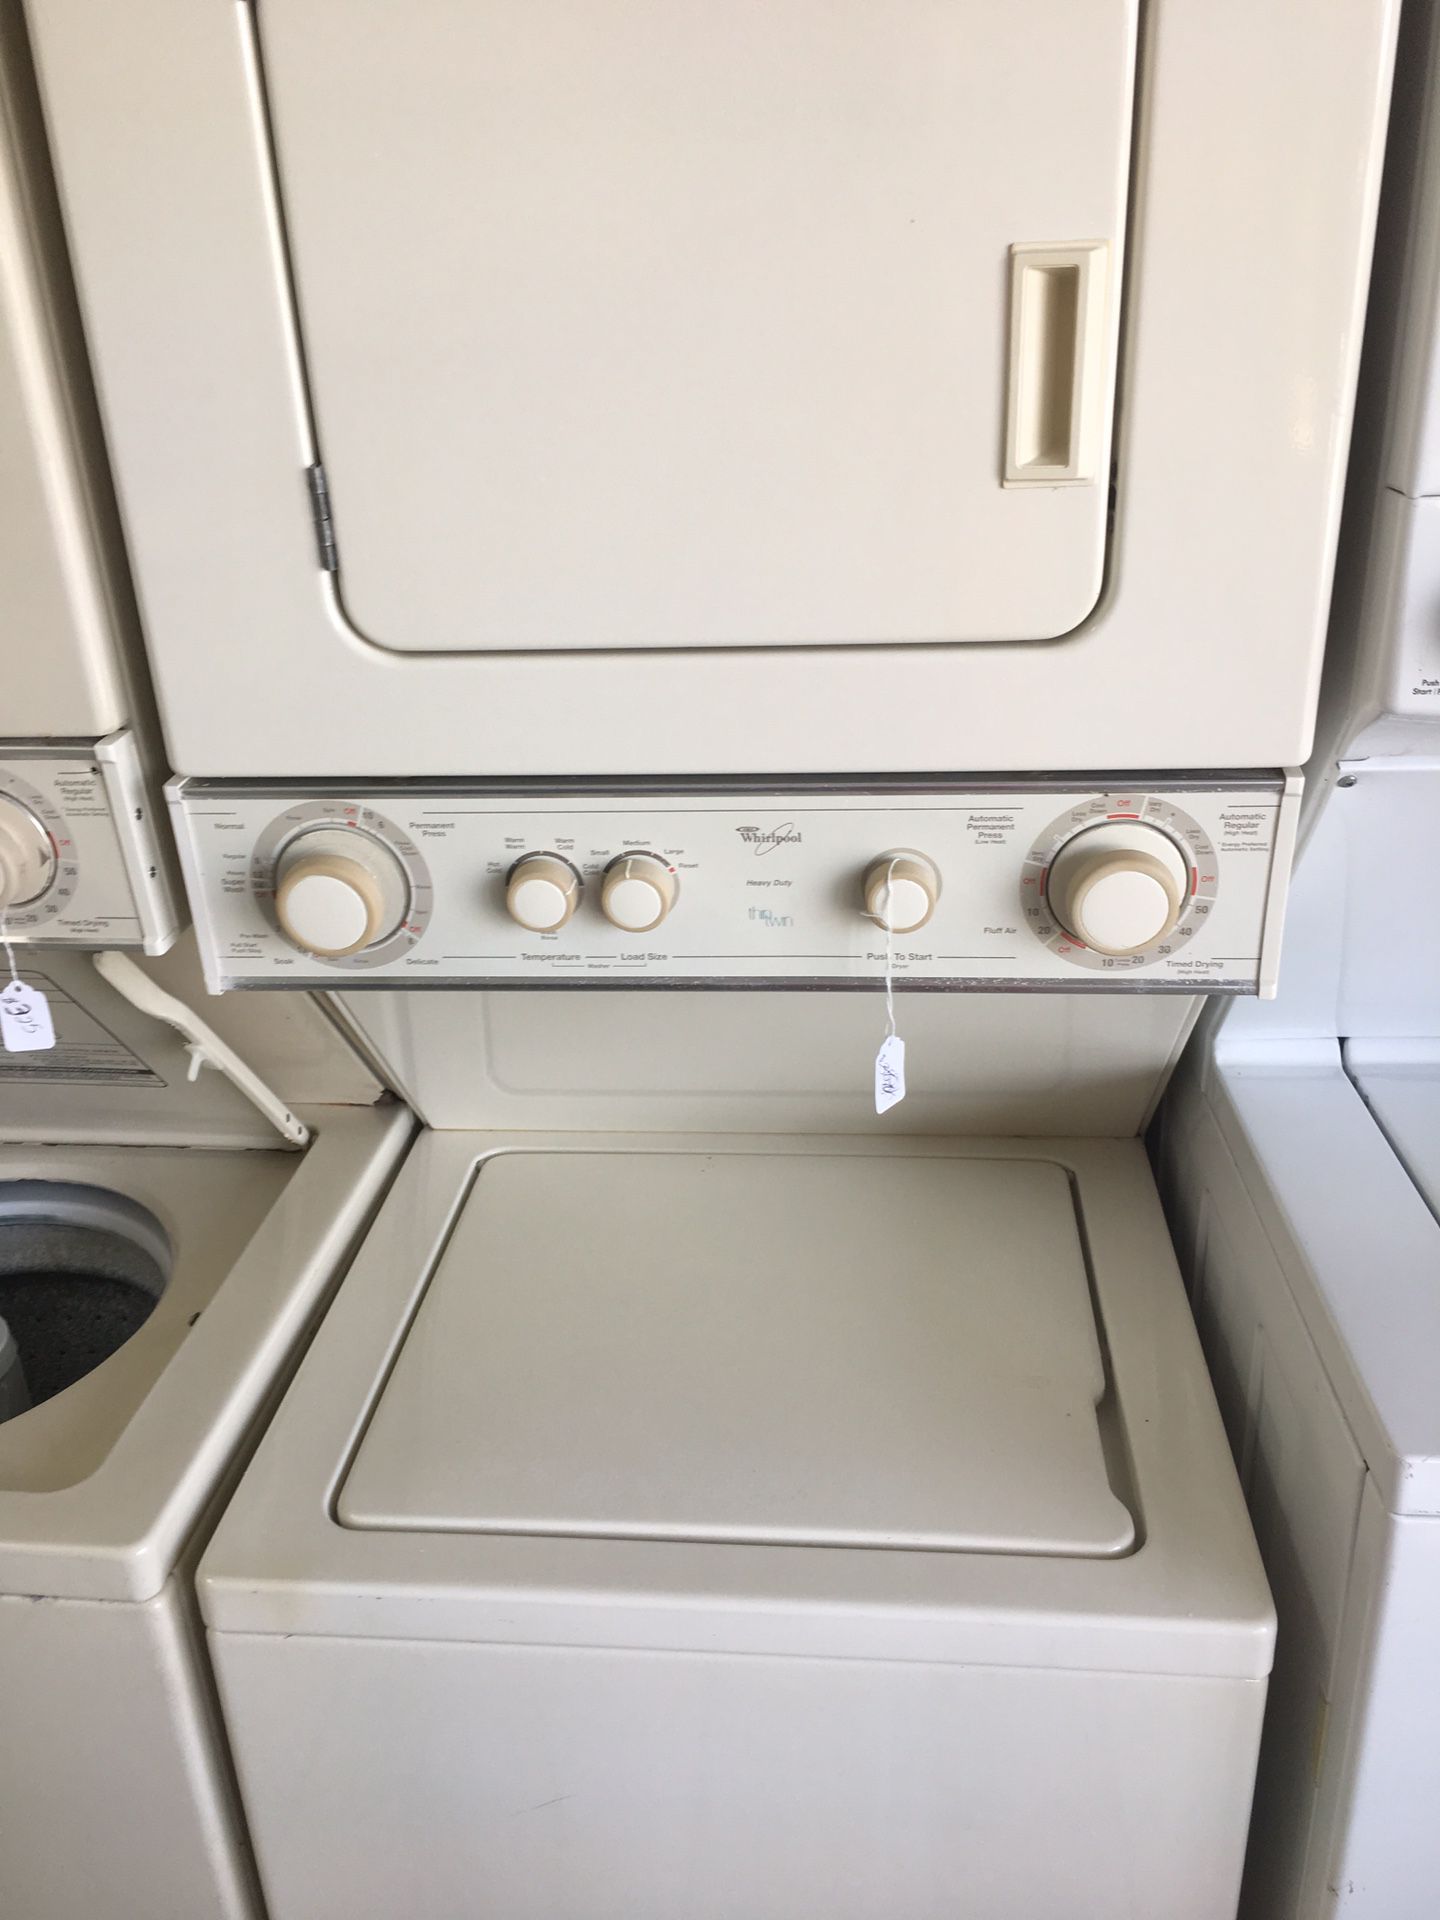 Whirlpool 24 inch stack washer and dryer combo